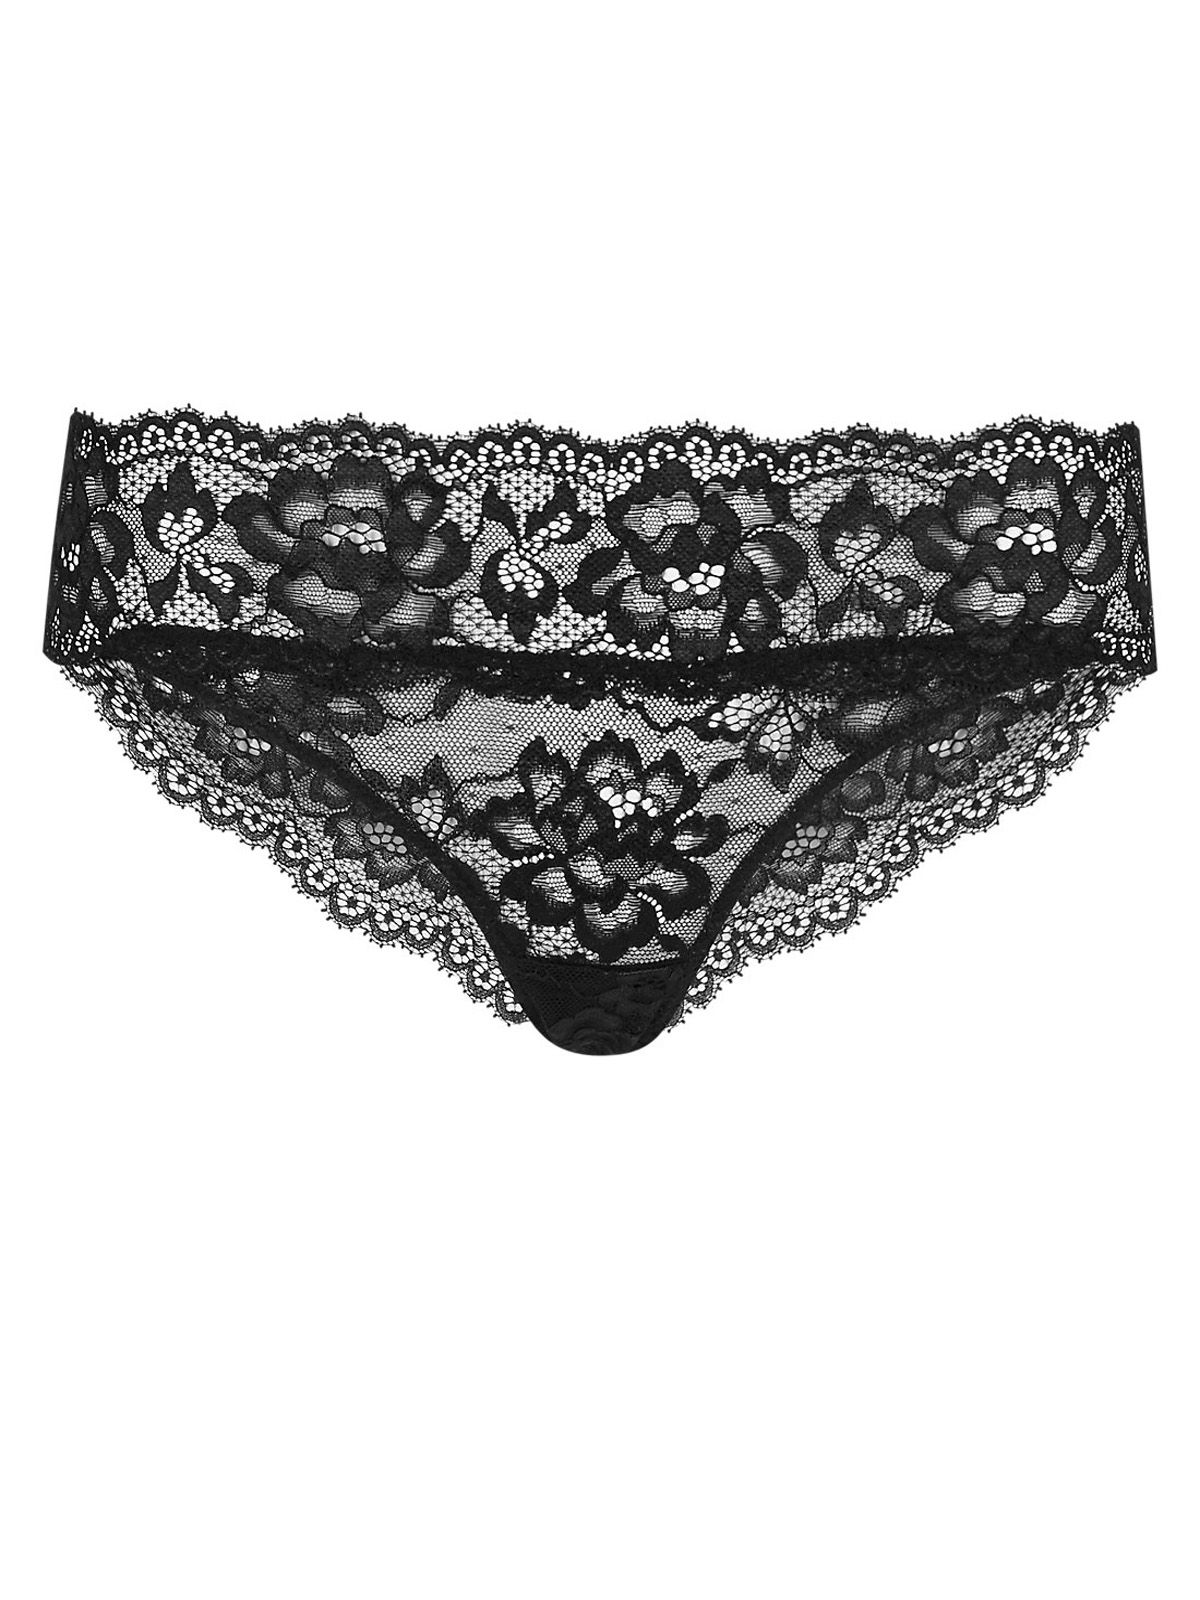 Marks and Spencer - - M&5 BLACK Lace Brazilian Knickers - Size 12